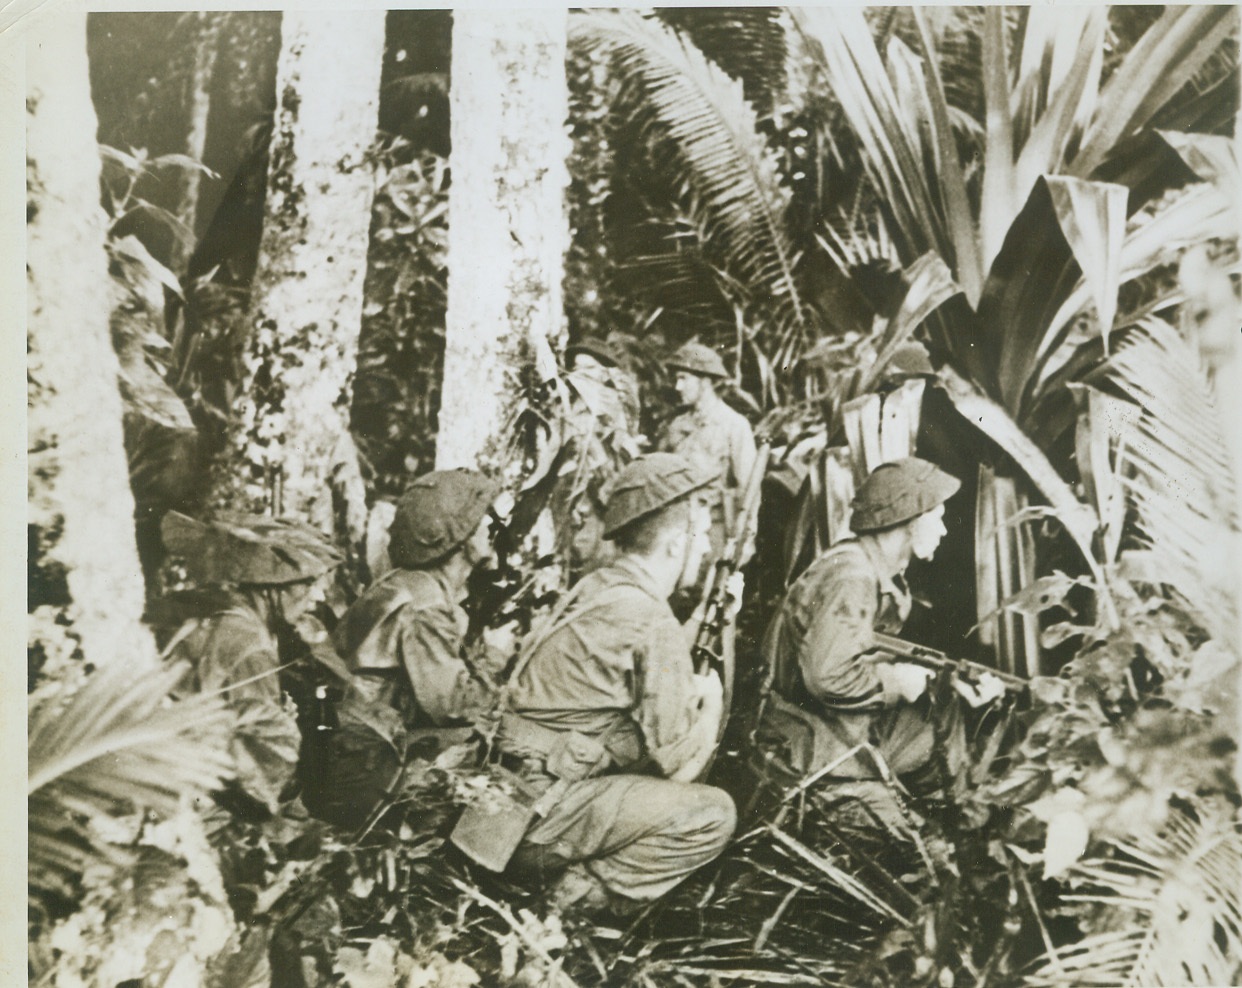 Now You Know Why Jungle Fighting is Tough, 11/10/1943. TREASURY ISLAND - It's difficult to distinguish these New Zealand soldiers in this jungle foliage so you can imagine how tough it is to see the enemy, too. These troops are deployed in the jungle after their recent invasion of Jap-help Treasury Island. Credit:--WP--(ACME);